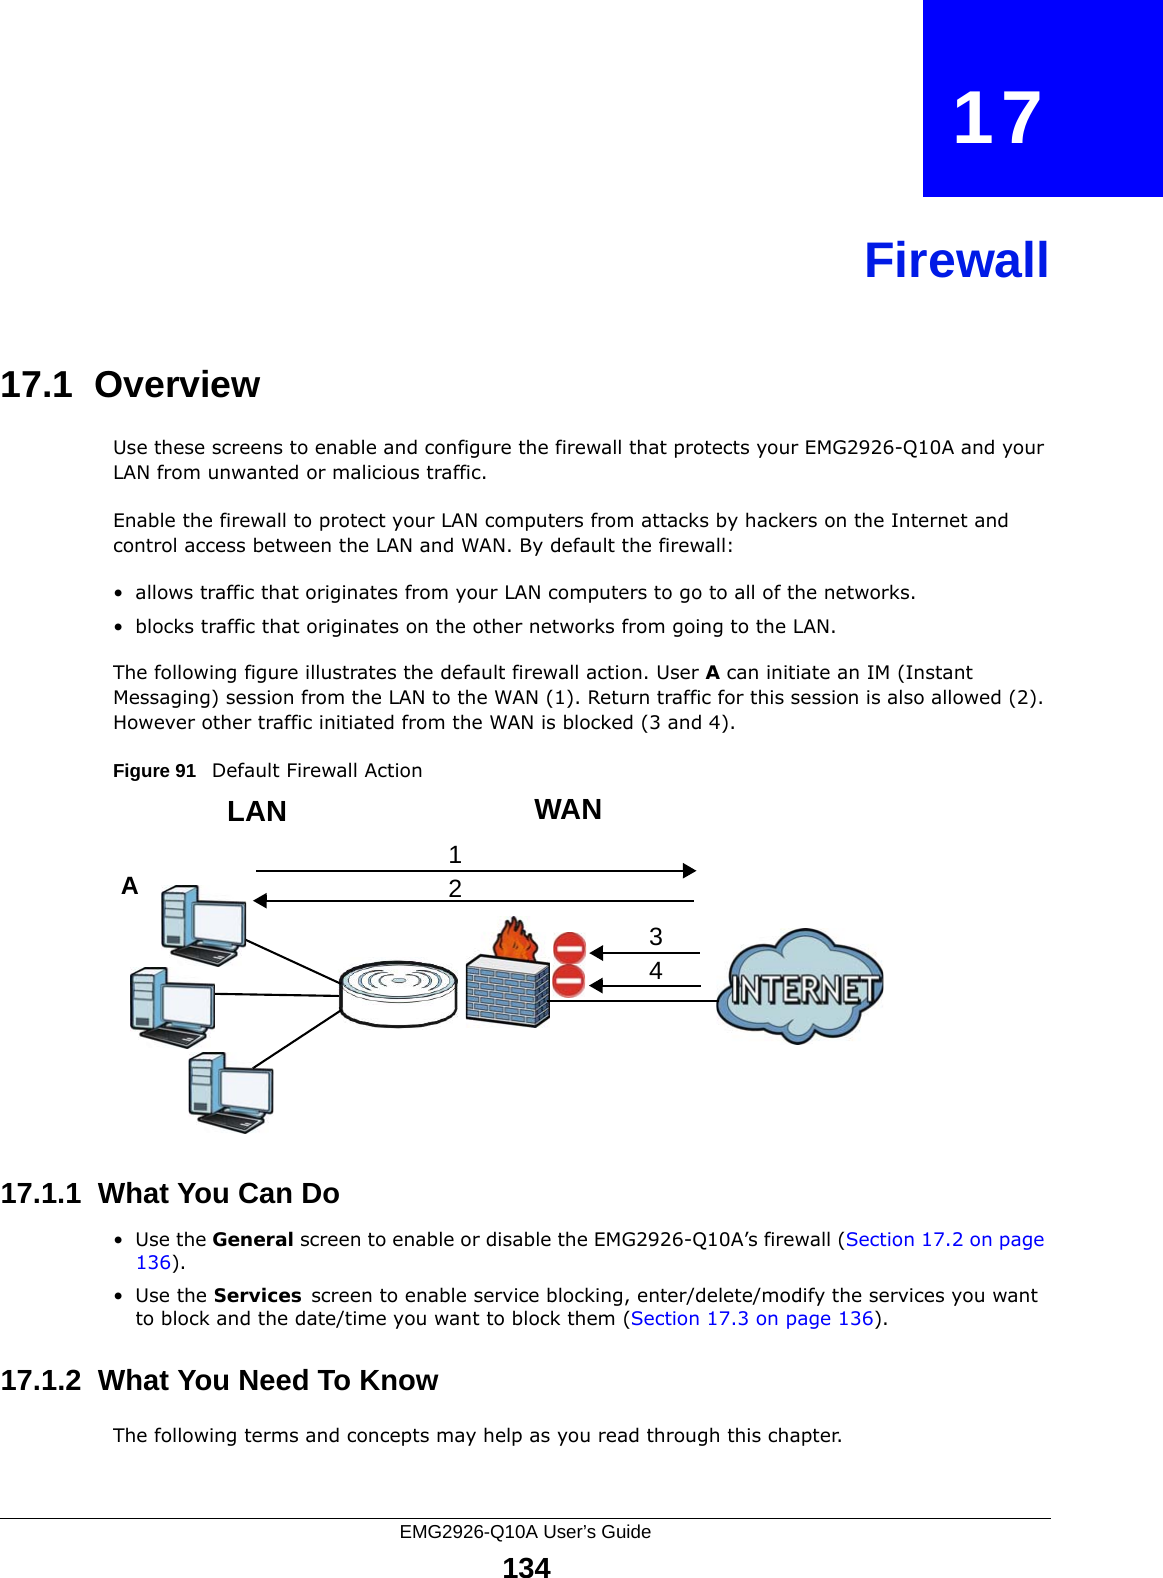 EMG2926-Q10A User’s Guide134CHAPTER   17Firewall17.1  Overview   Use these screens to enable and configure the firewall that protects your EMG2926-Q10A and your LAN from unwanted or malicious traffic.Enable the firewall to protect your LAN computers from attacks by hackers on the Internet and control access between the LAN and WAN. By default the firewall:• allows traffic that originates from your LAN computers to go to all of the networks. • blocks traffic that originates on the other networks from going to the LAN. The following figure illustrates the default firewall action. User A can initiate an IM (Instant Messaging) session from the LAN to the WAN (1). Return traffic for this session is also allowed (2). However other traffic initiated from the WAN is blocked (3 and 4).Figure 91   Default Firewall Action17.1.1  What You Can Do•Use the General screen to enable or disable the EMG2926-Q10A’s firewall (Section 17.2 on page 136).•Use the Services screen to enable service blocking, enter/delete/modify the services you want to block and the date/time you want to block them (Section 17.3 on page 136).17.1.2  What You Need To KnowThe following terms and concepts may help as you read through this chapter.WANLAN3412A